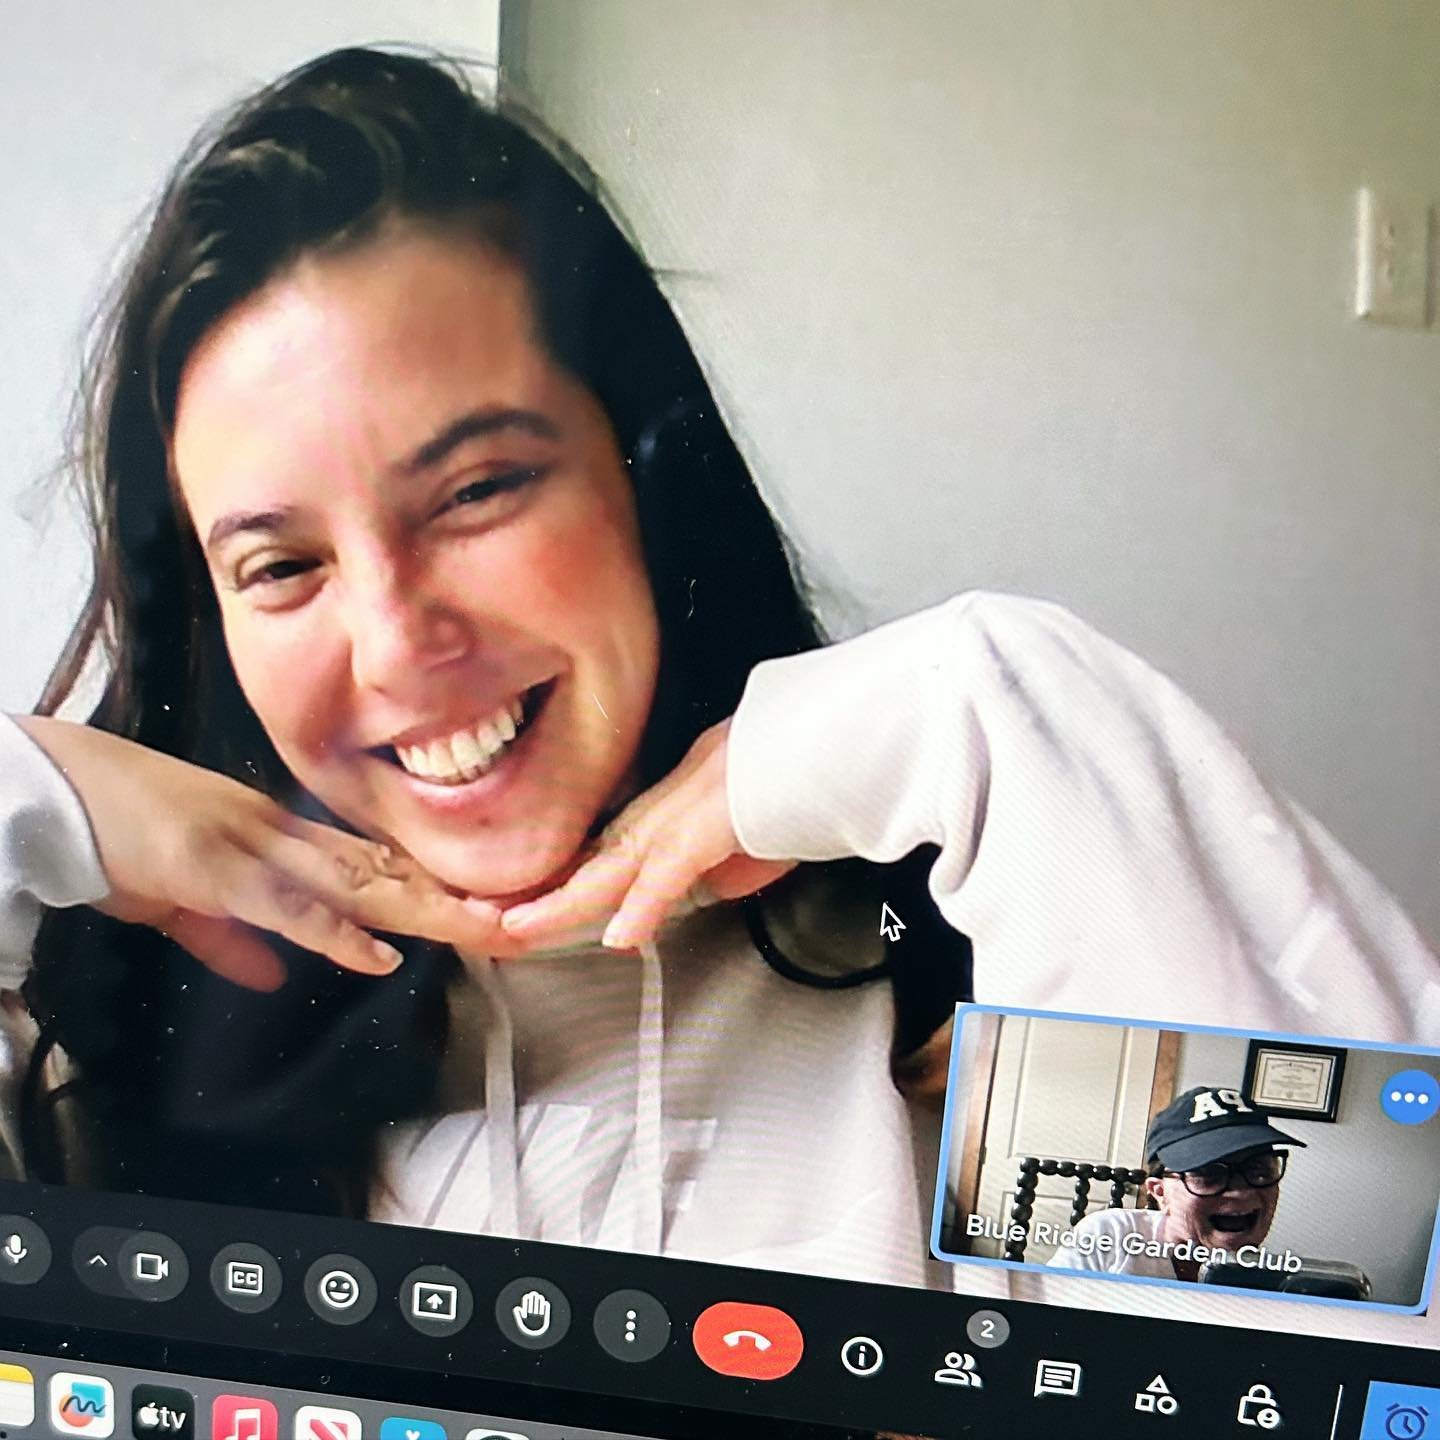 When your club&rsquo;s VP is wrapping up work in Denver, you video conference about our website 🥰 I Missssss You!